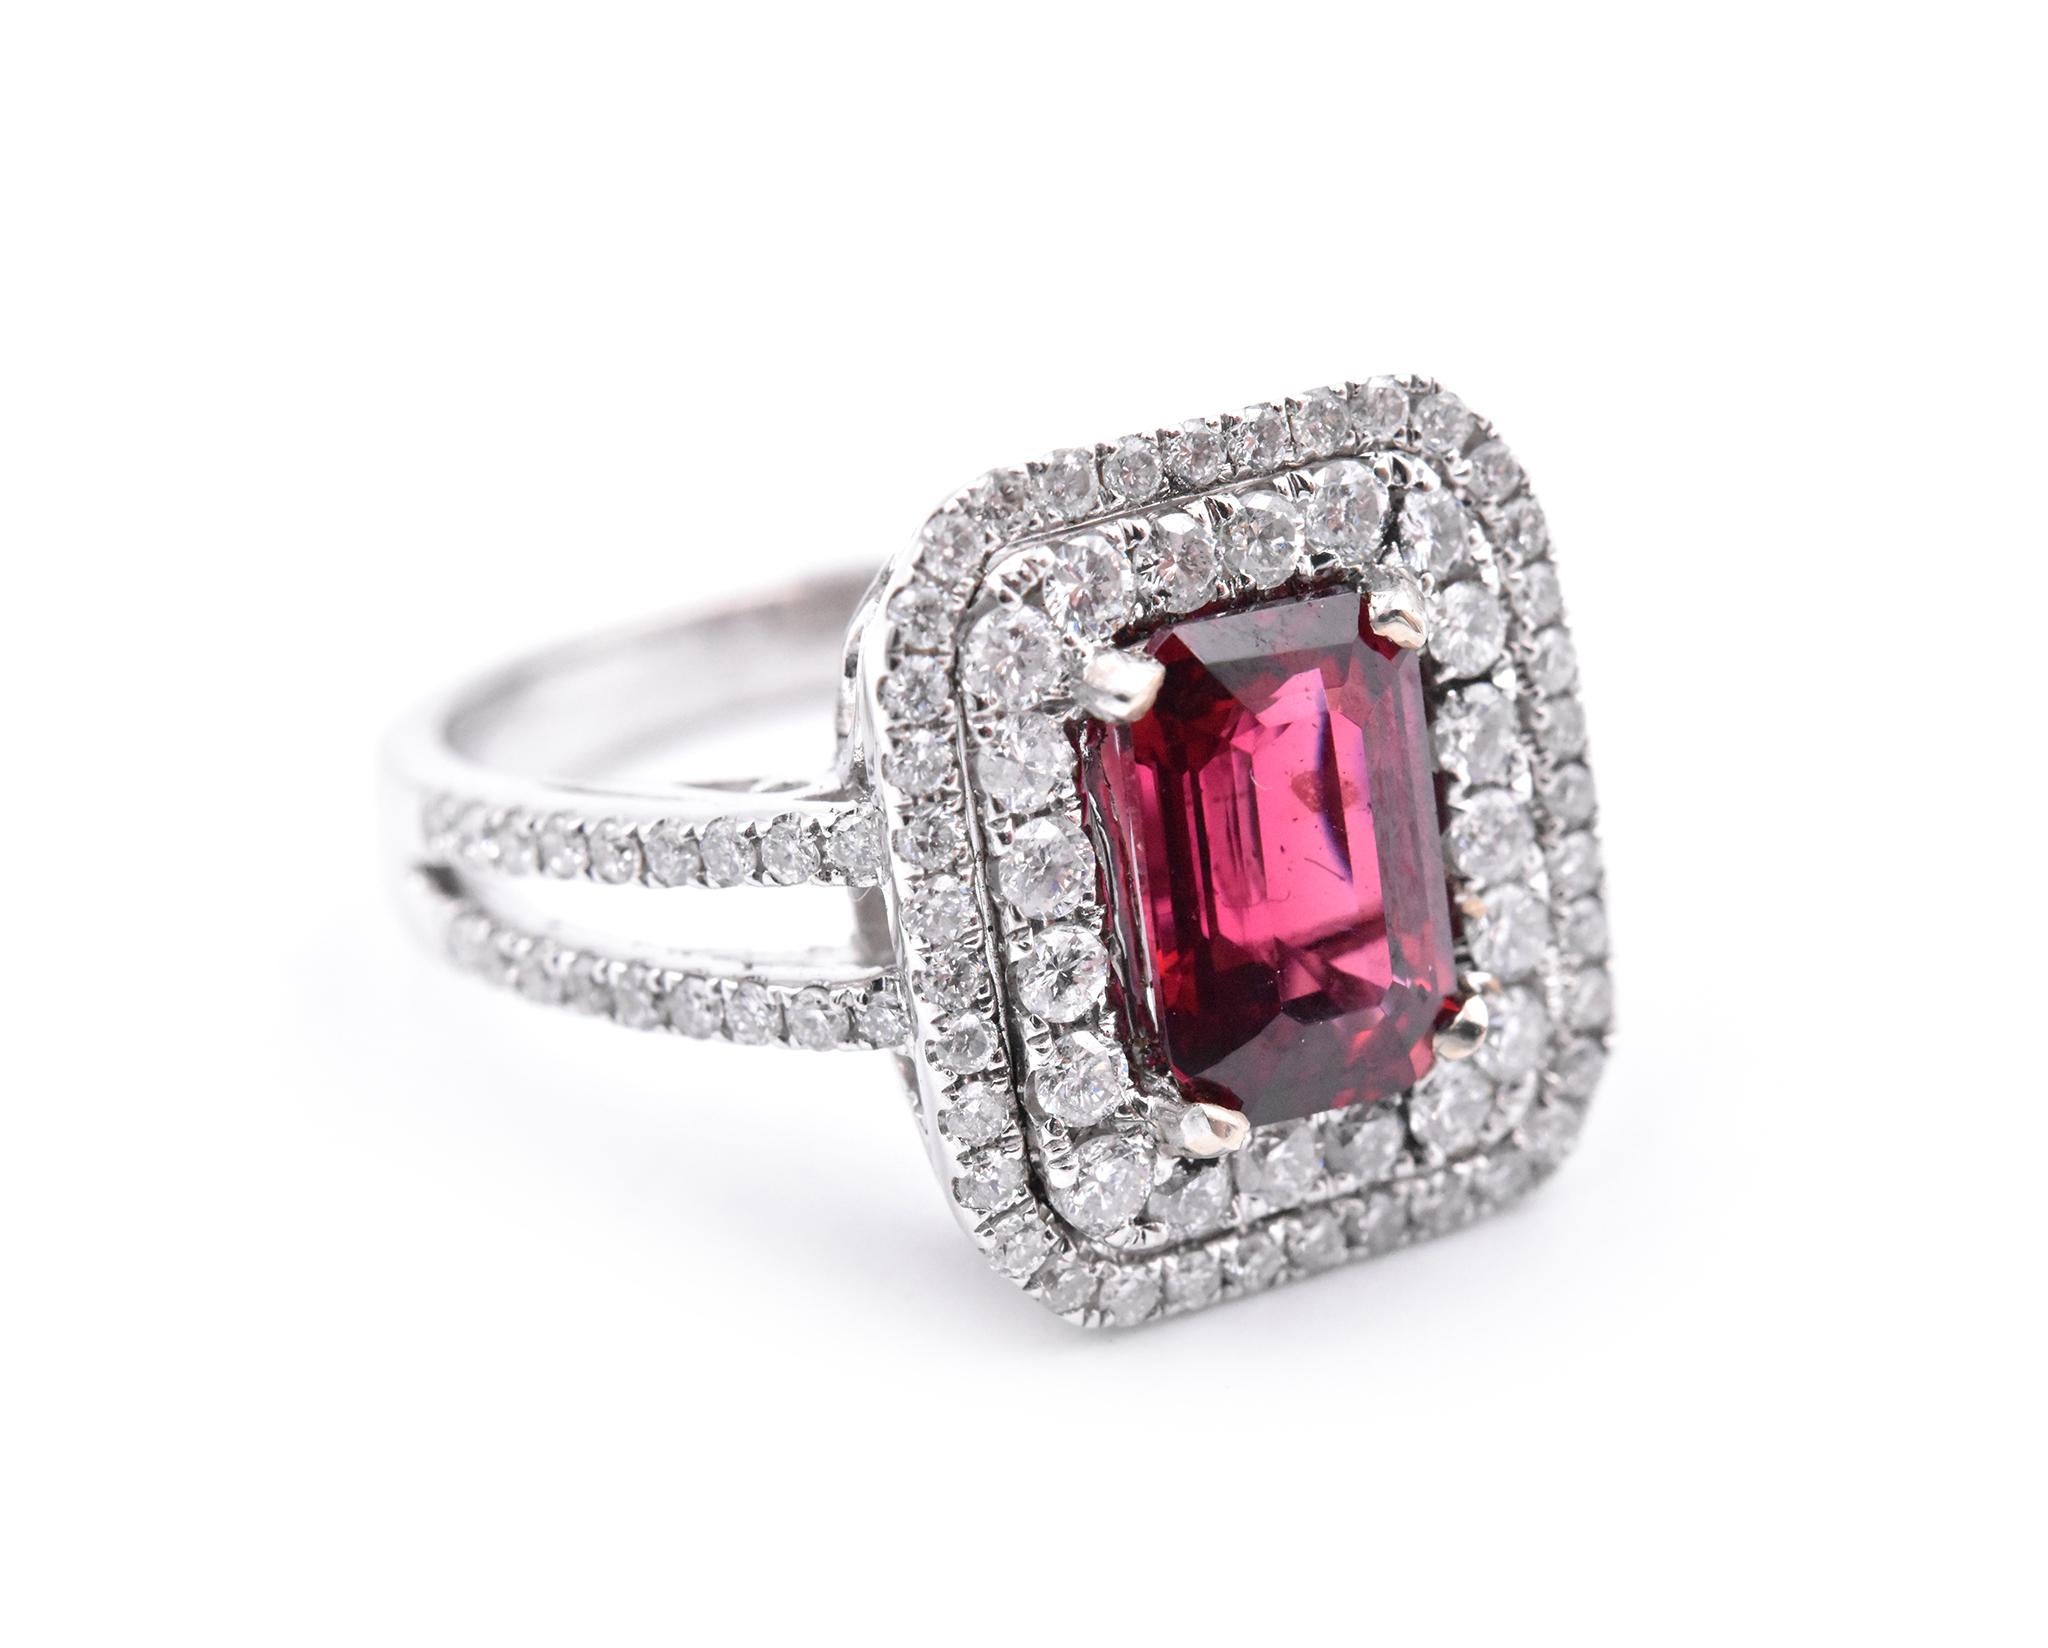 Designer: custom design
Material: 14k white gold
Gemstones: Red Spinel = 1.71ct emerald cut
Certification: AGI 25333
Diamonds: 93 round brilliant cuts = .88cttw
Color: F
Clarity: VS2-SI
Ring Size: 7.5 (please allow two additional shipping days for